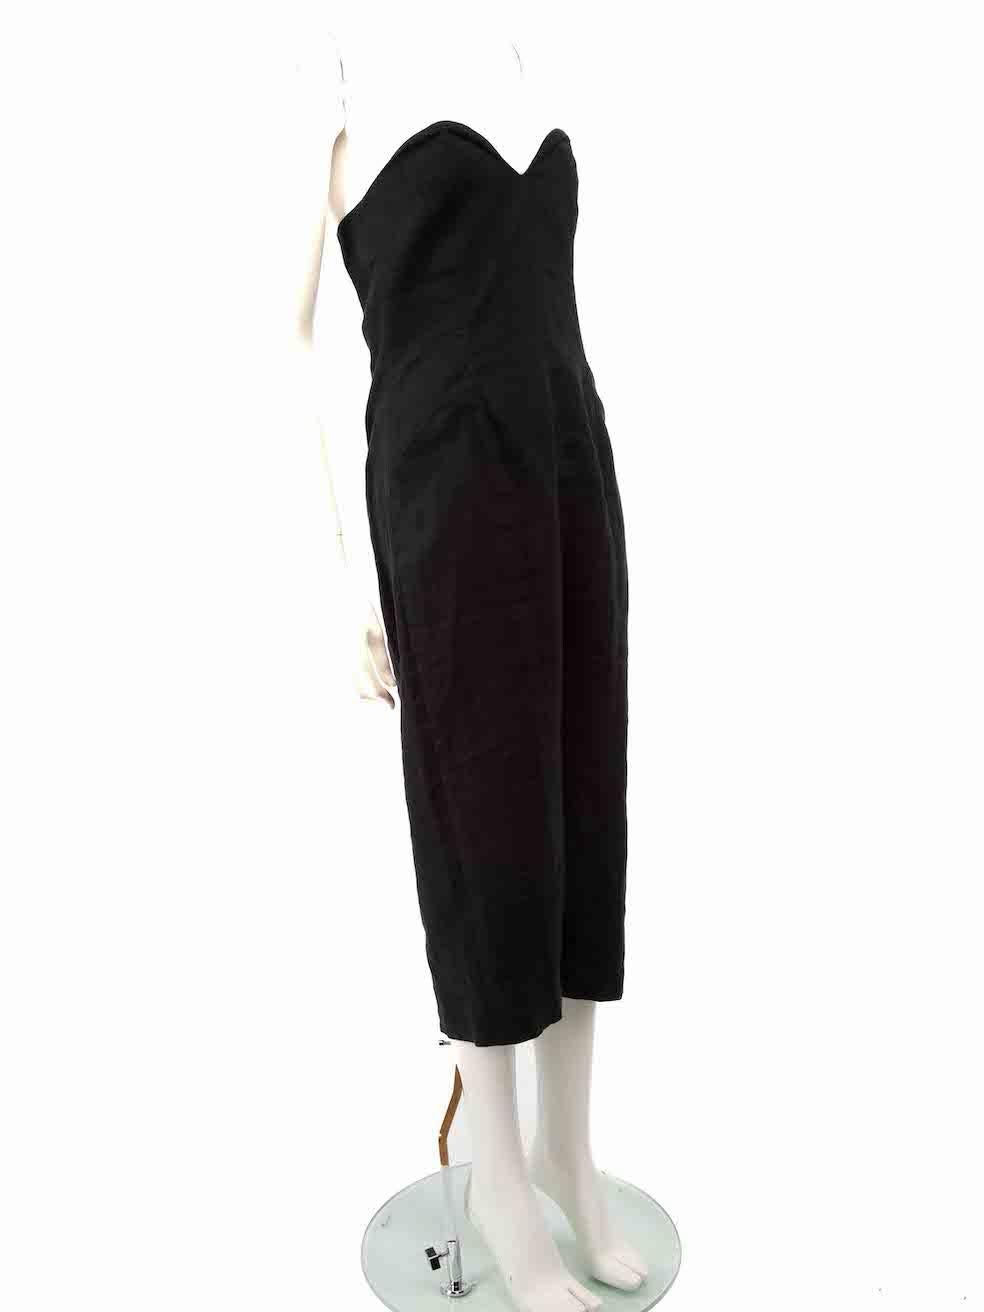 CONDITION is Very good. Minimal wear to dress is evident. Minimal pull thread to overall dress on this used Mara Hoffman designer resale item.
 
 
 
 Details
 
 
 Black
 
 Linen
 
 Midi dress
 
 Strapless
 
 Sweetheart neckline
 
 2x Front side